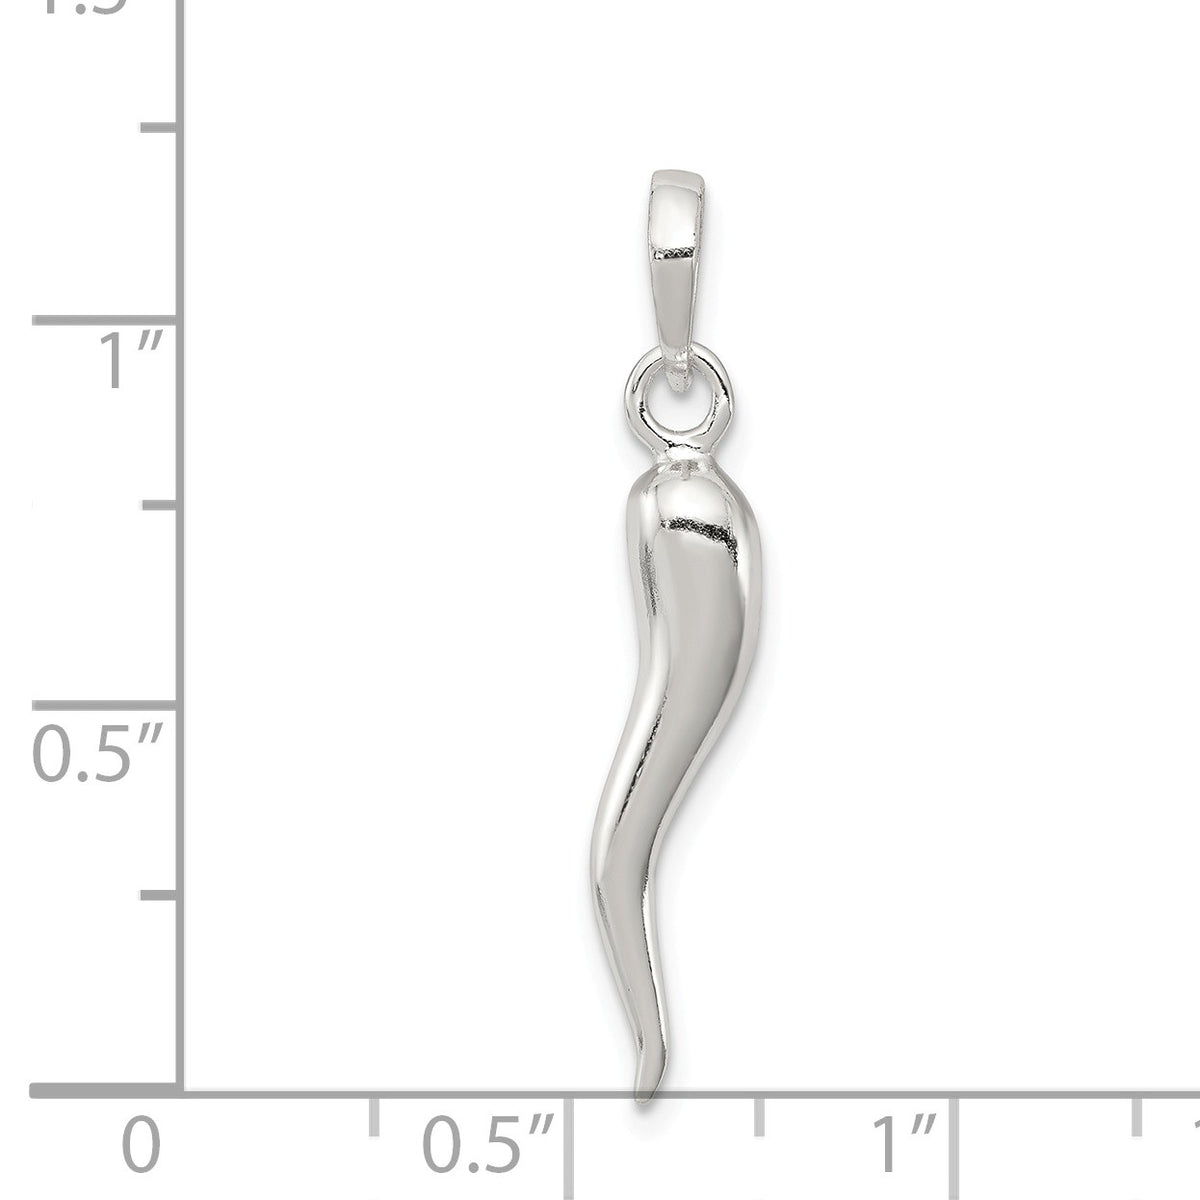 Alternate view of the Sterling Silver 3D Polished Italian Horn Pendant, 4 x 30mm by The Black Bow Jewelry Co.